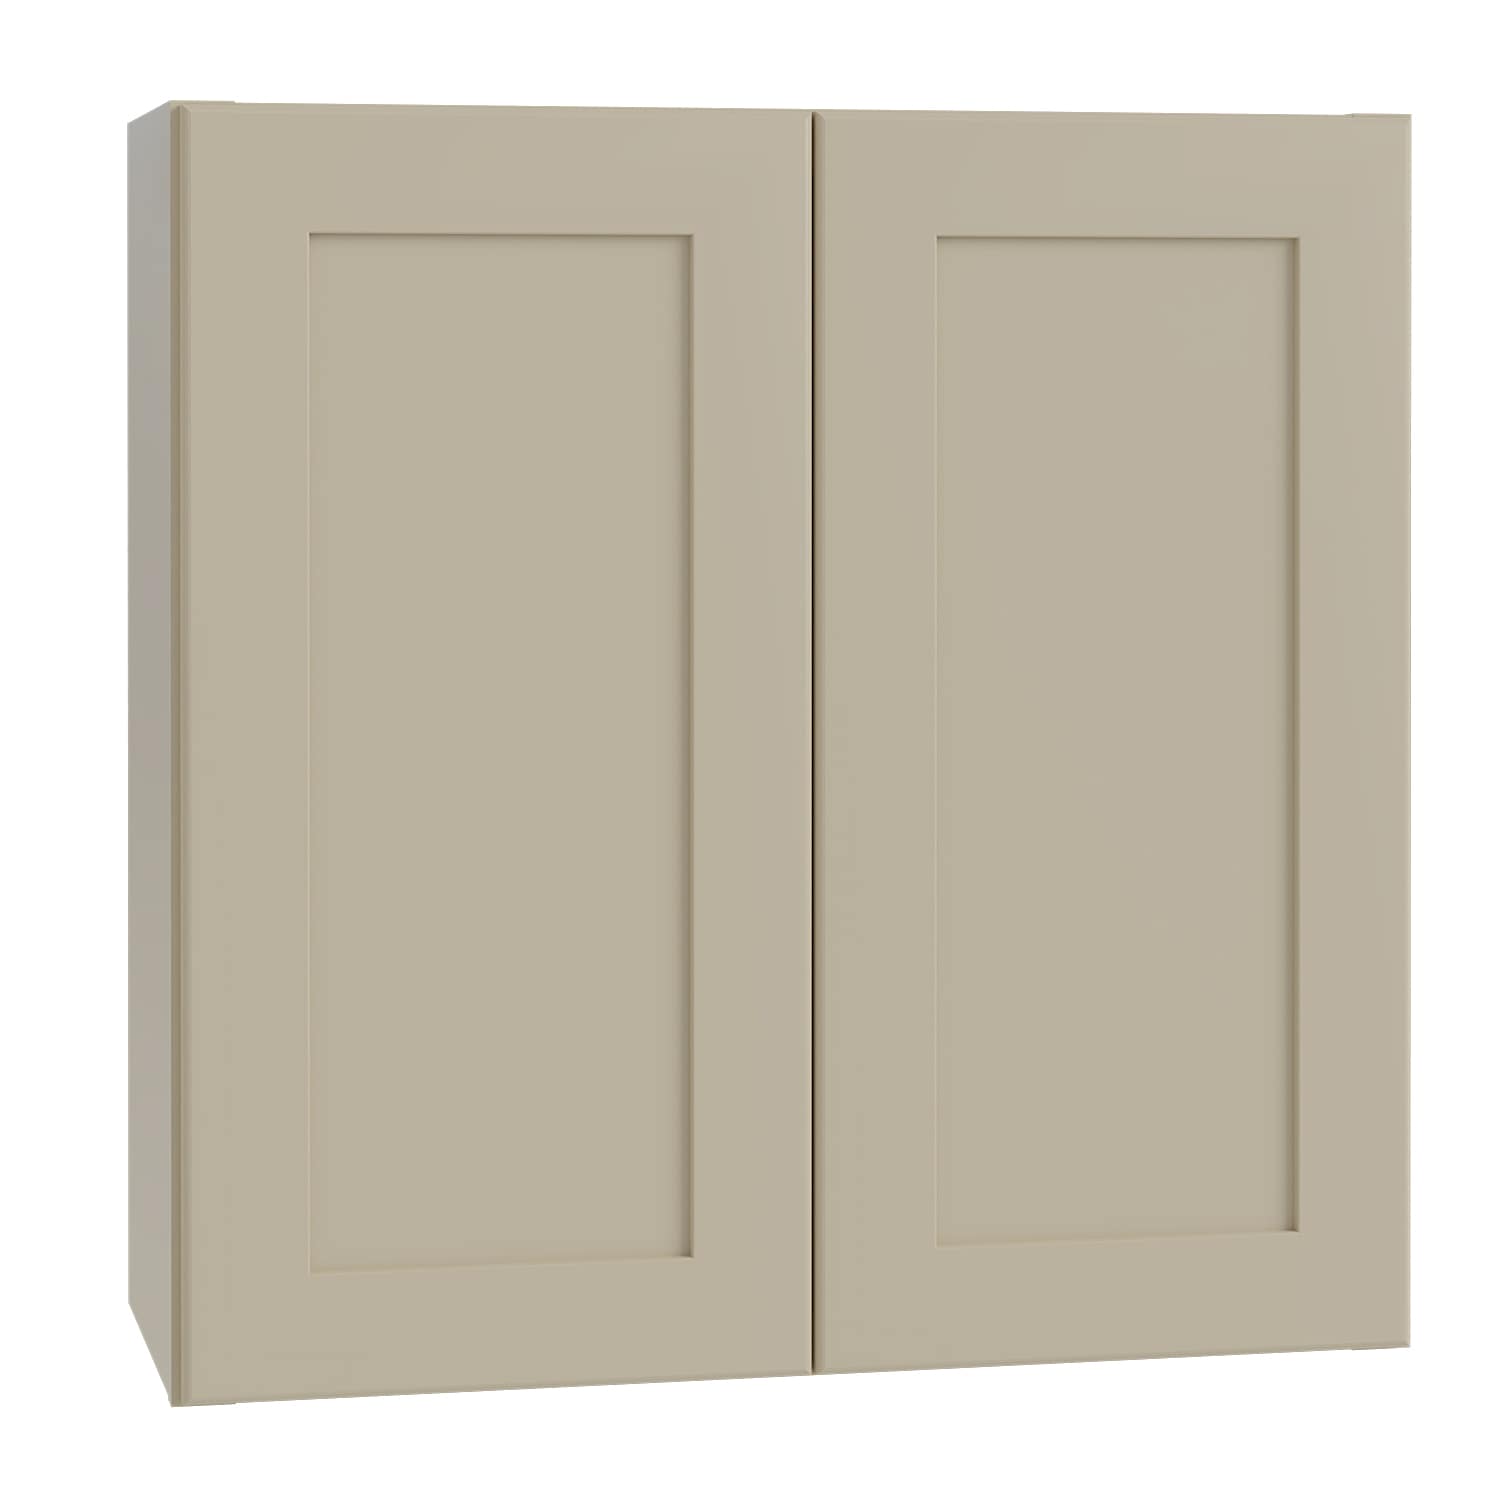 Luxxe Cabinetry 36-in W x 42-in H x 12-in D Norfolk Blended Cream Painted Door Wall Fully Assembled Semi-custom Cabinet in Off-White | W3642-NBC